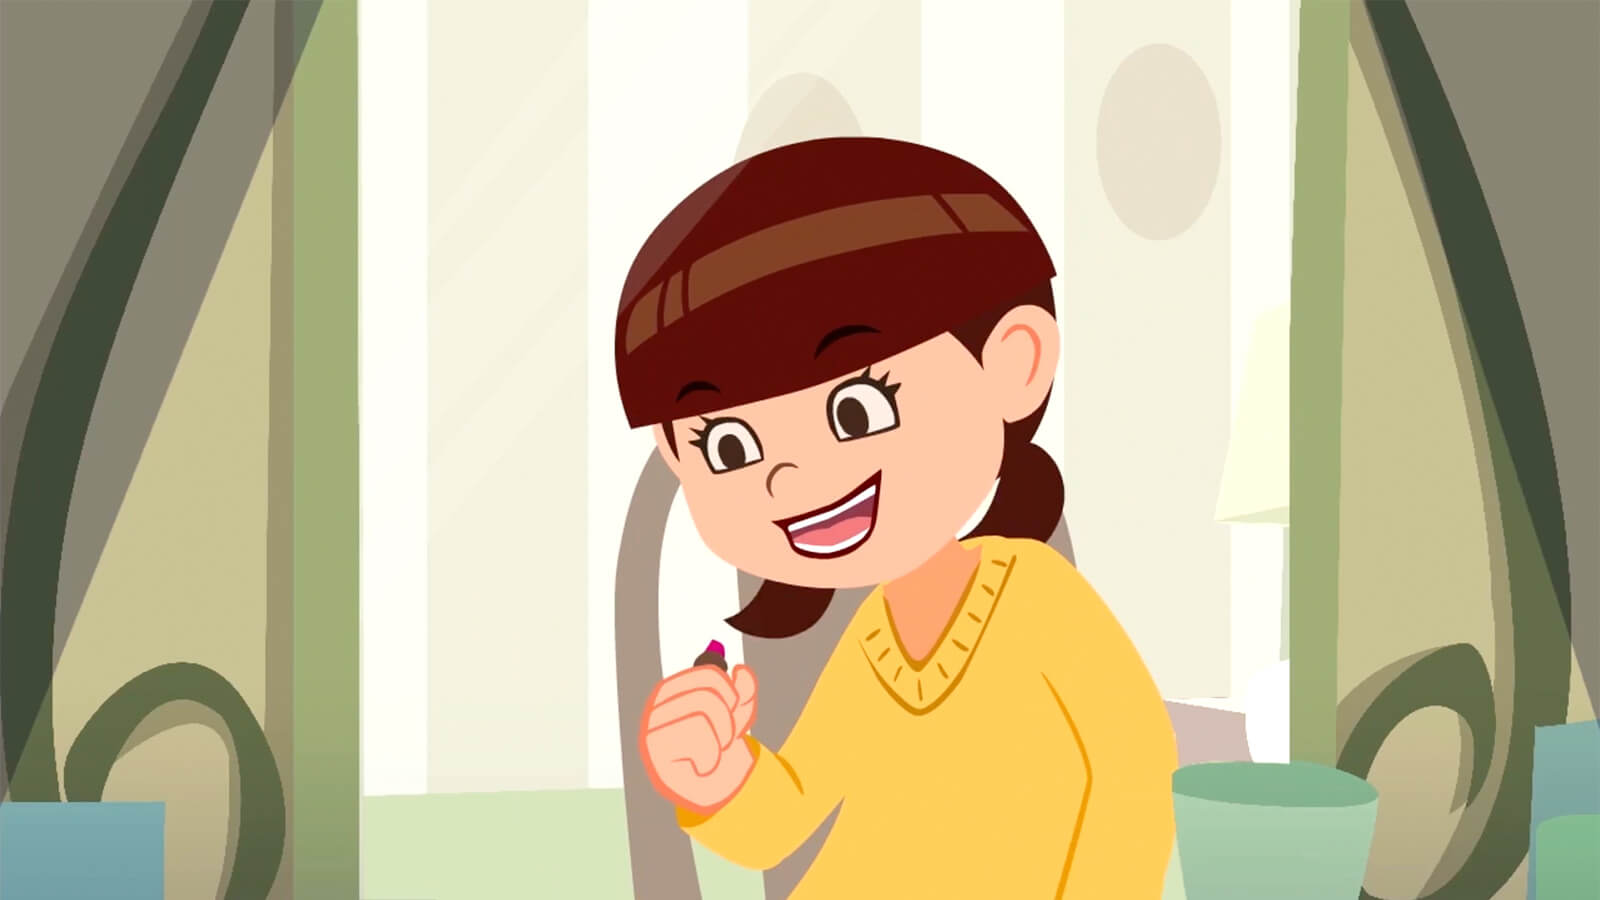 A young brown-haired girl in a yellow sweater grins while clenching a pink lipstick applicator in her fist.